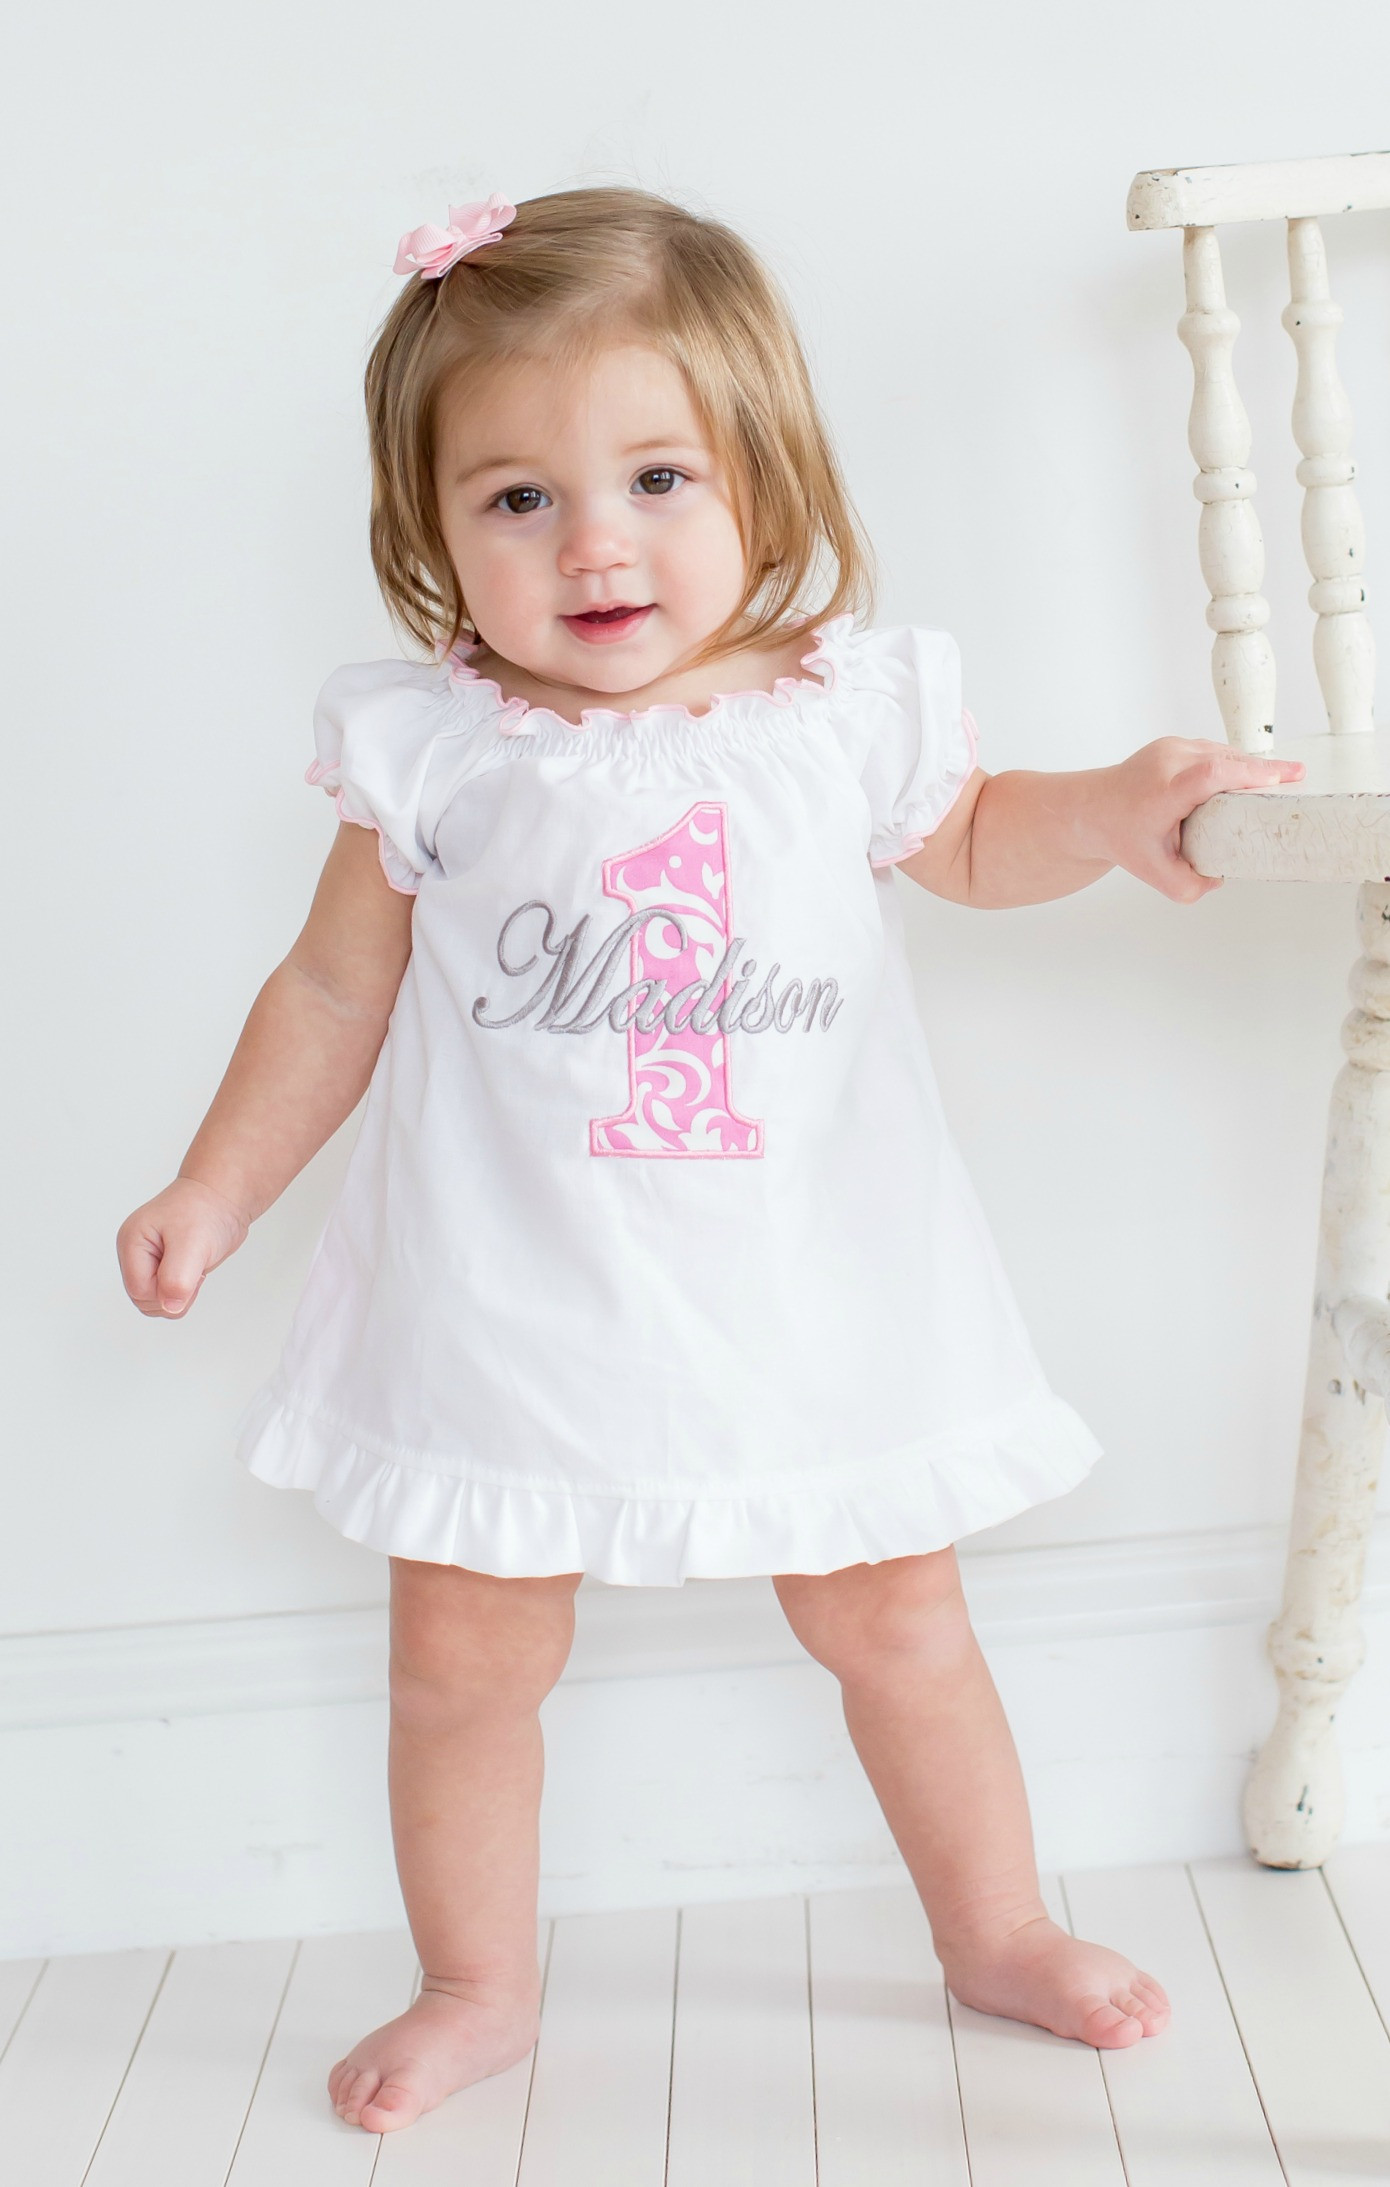 1St Birthday Party Dress For Baby Girl
 Baby Girl First Birthday Dress Pink Damask 1